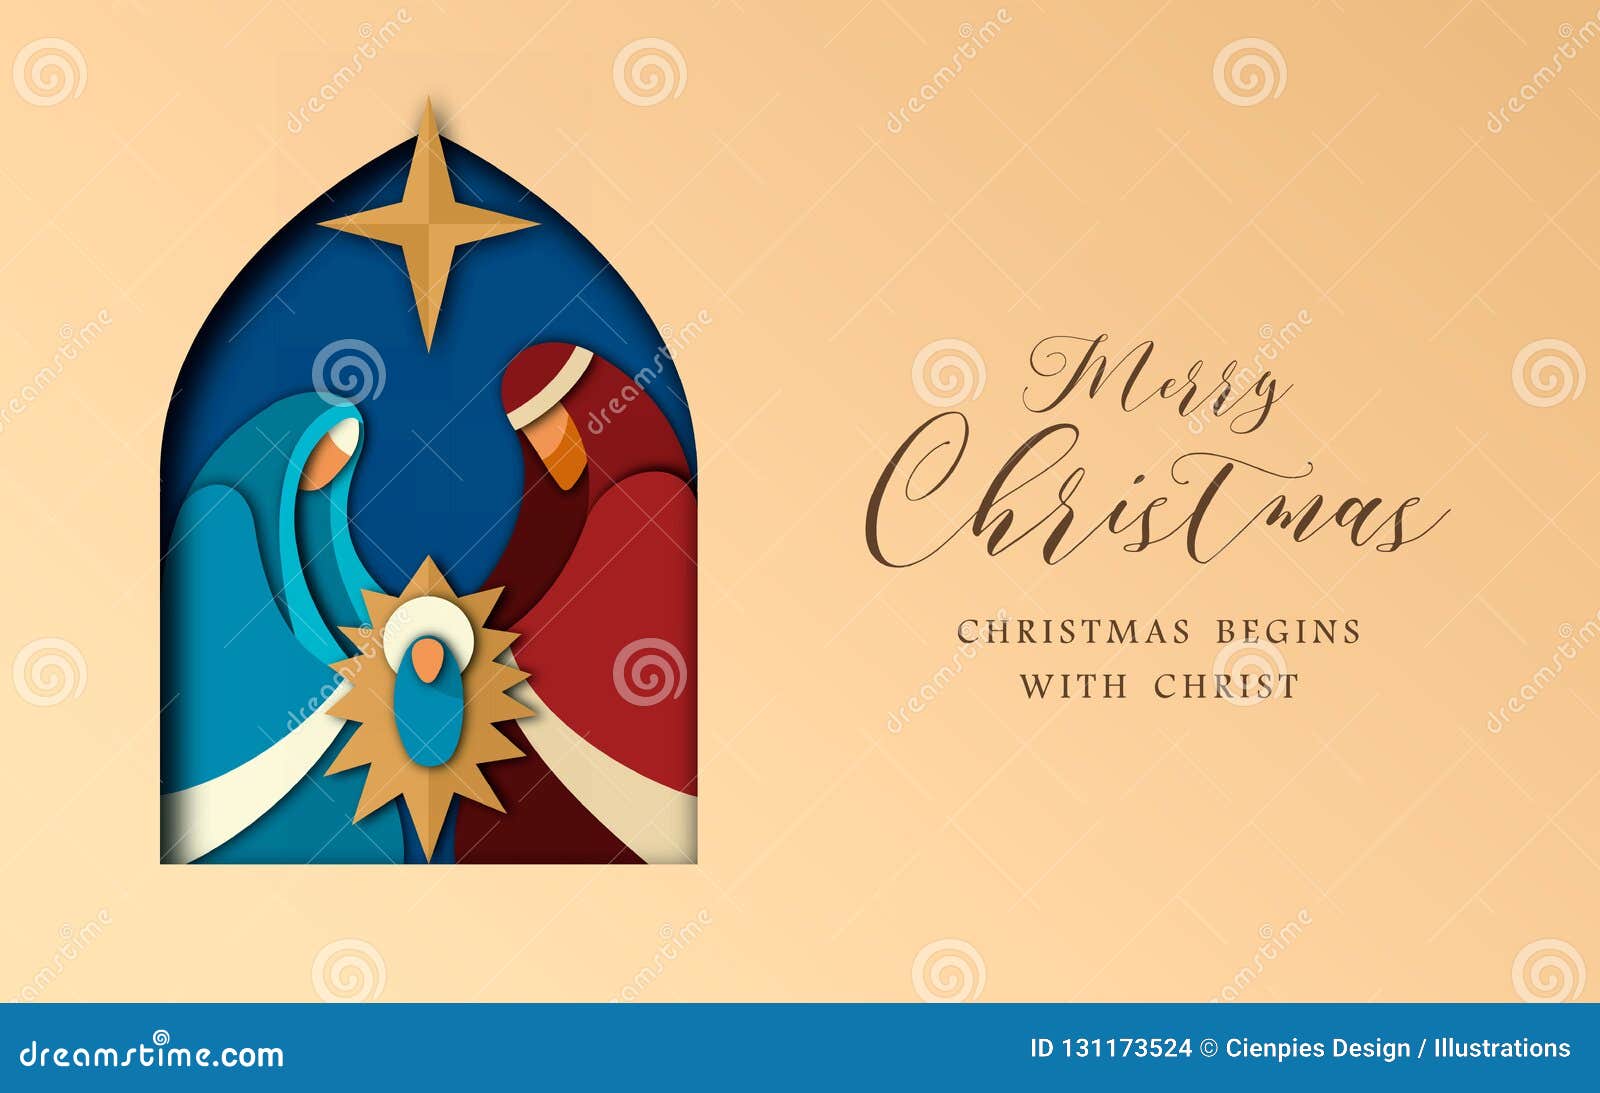 christmas paper cut card of jesus and holy family